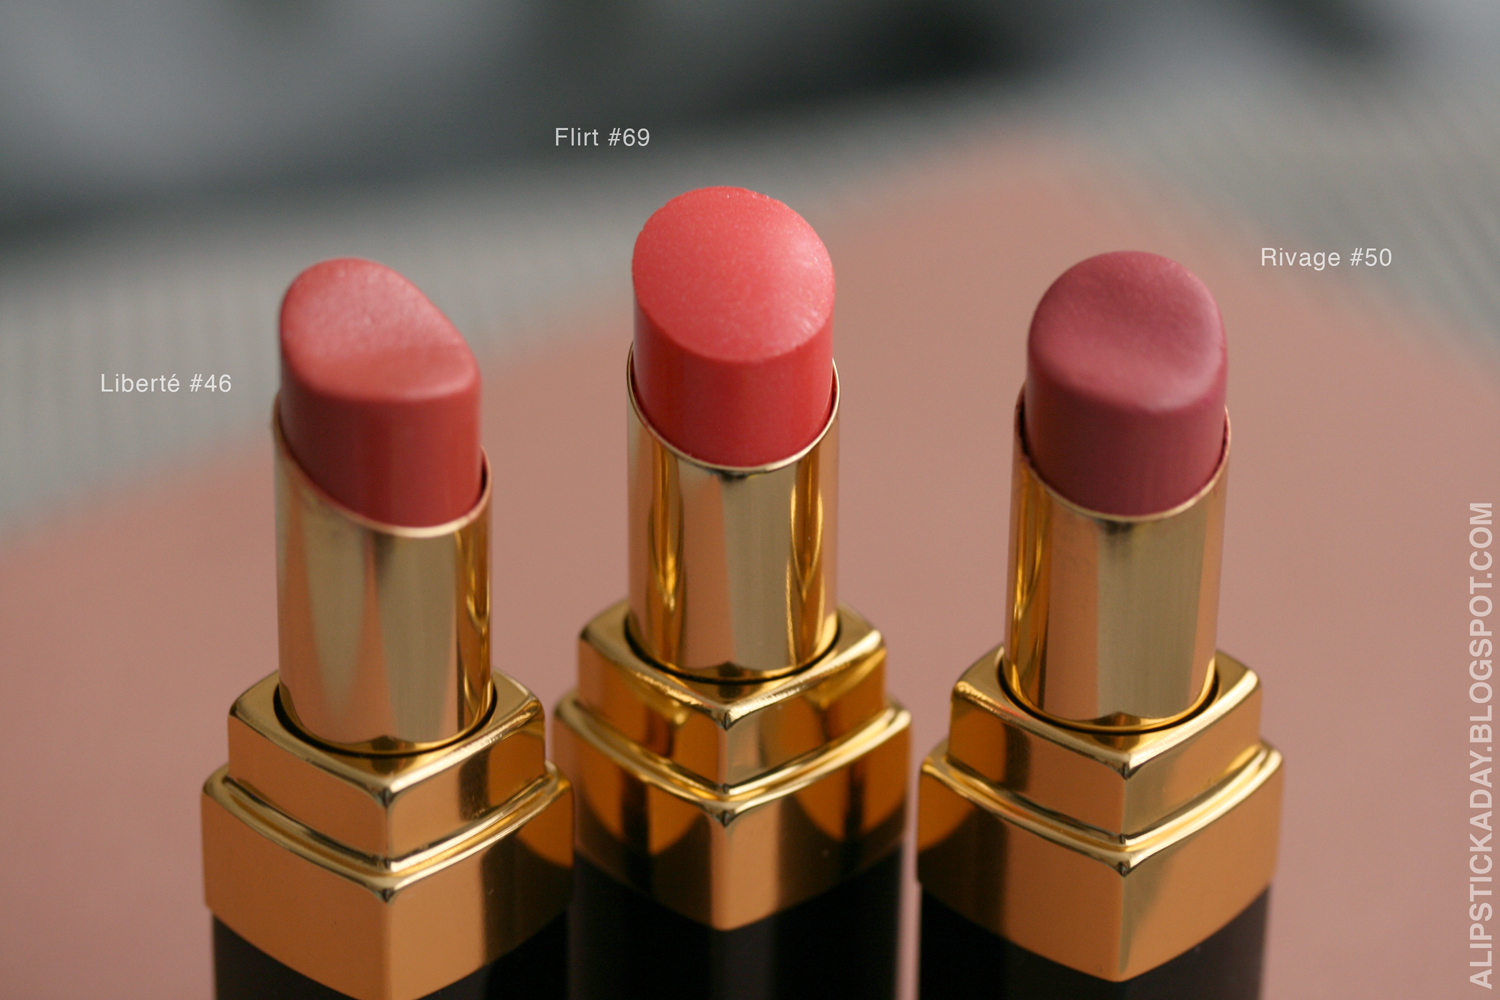 Every Girl's must have lipstick💄, Gallery posted by Imtins